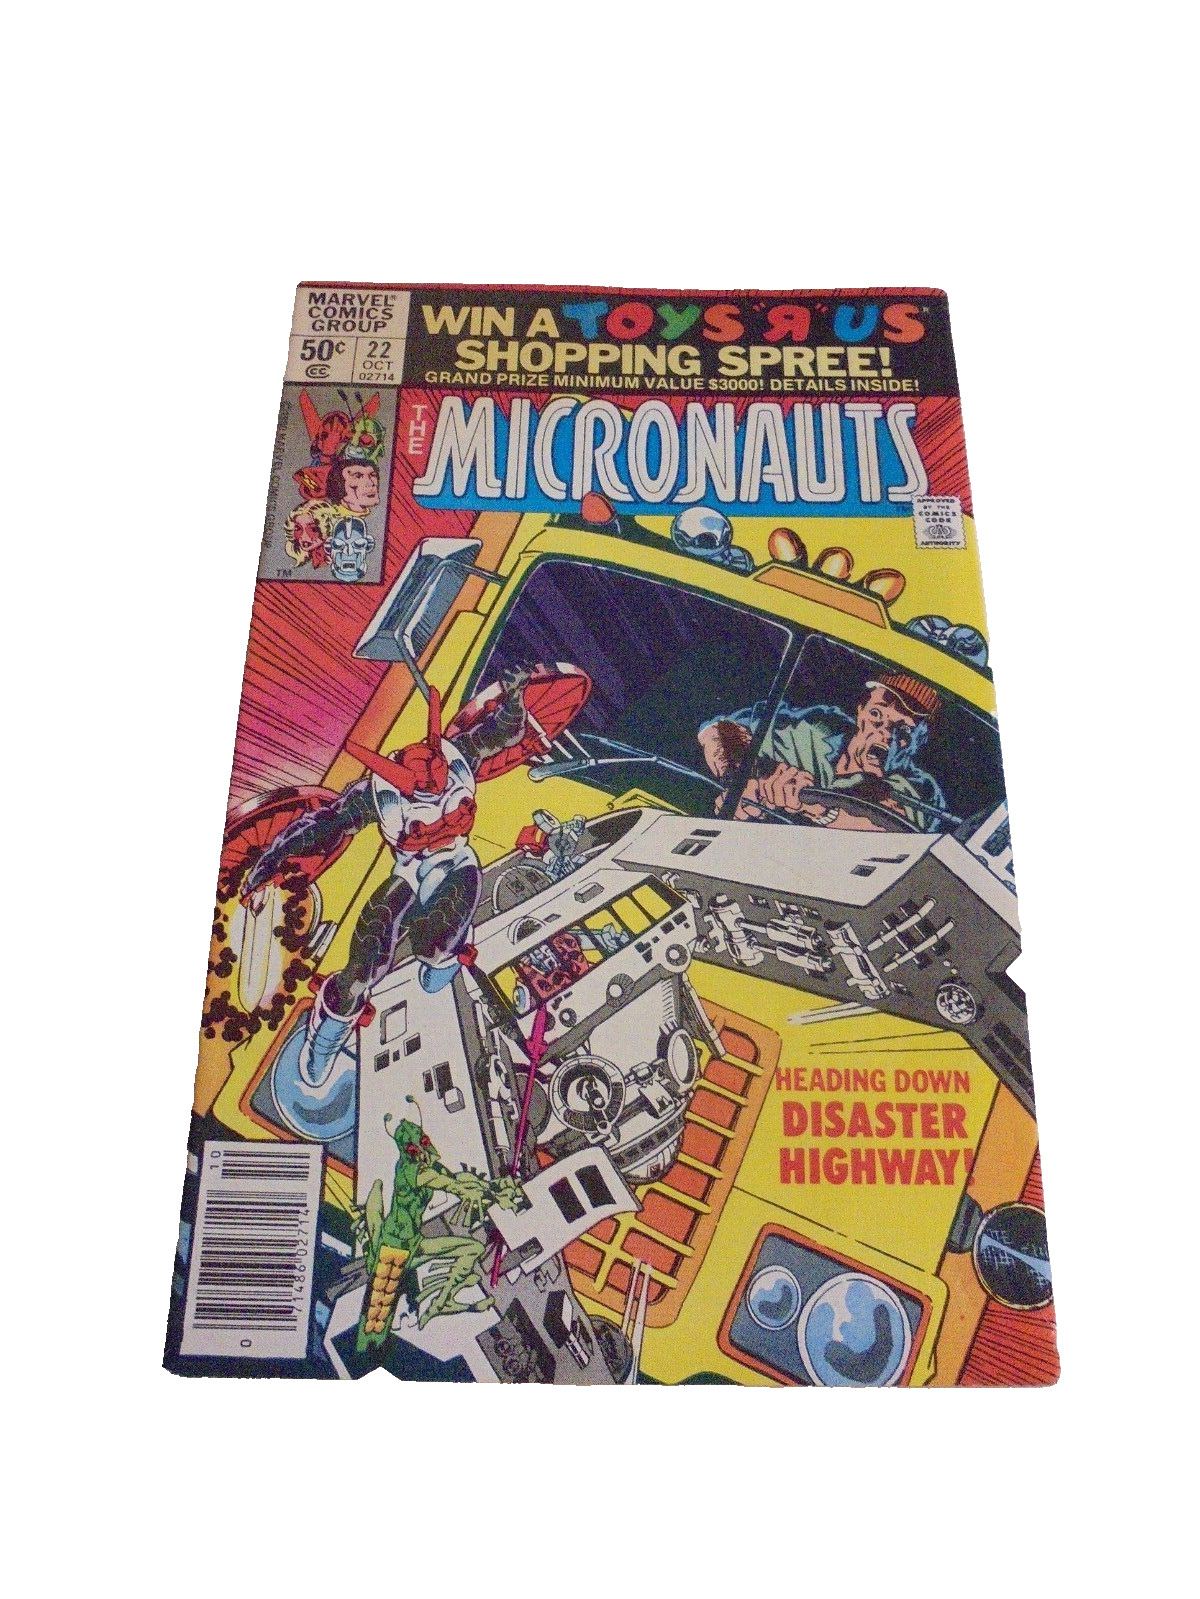 Marvel Comics Group The Micronauts # 22 Heading Down Disaster Highway 1980 Good